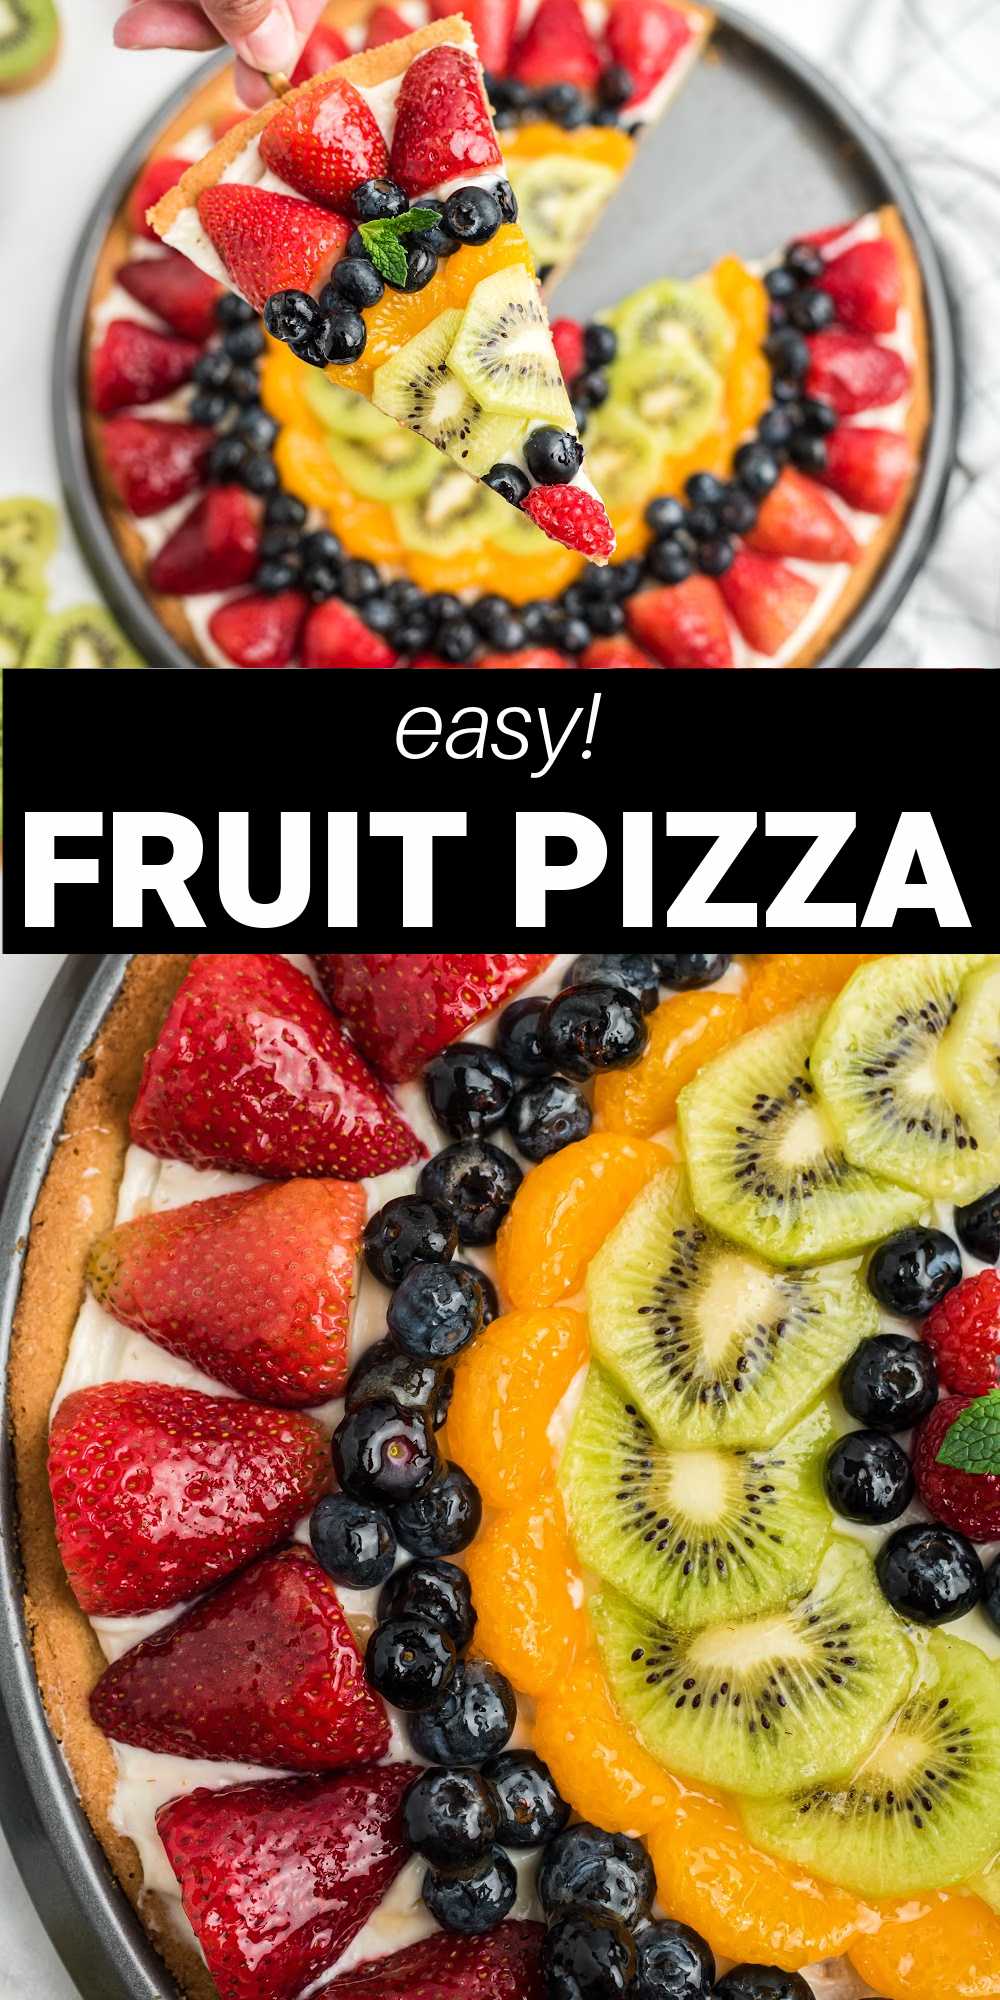 Fruit Pizza is covered bursting with colorful fresh fruit full of naturally sweet flavors on a sugar cookie crust. It has dreamy cream cheese frosting that make this fruit dessert absolutely irresistible.